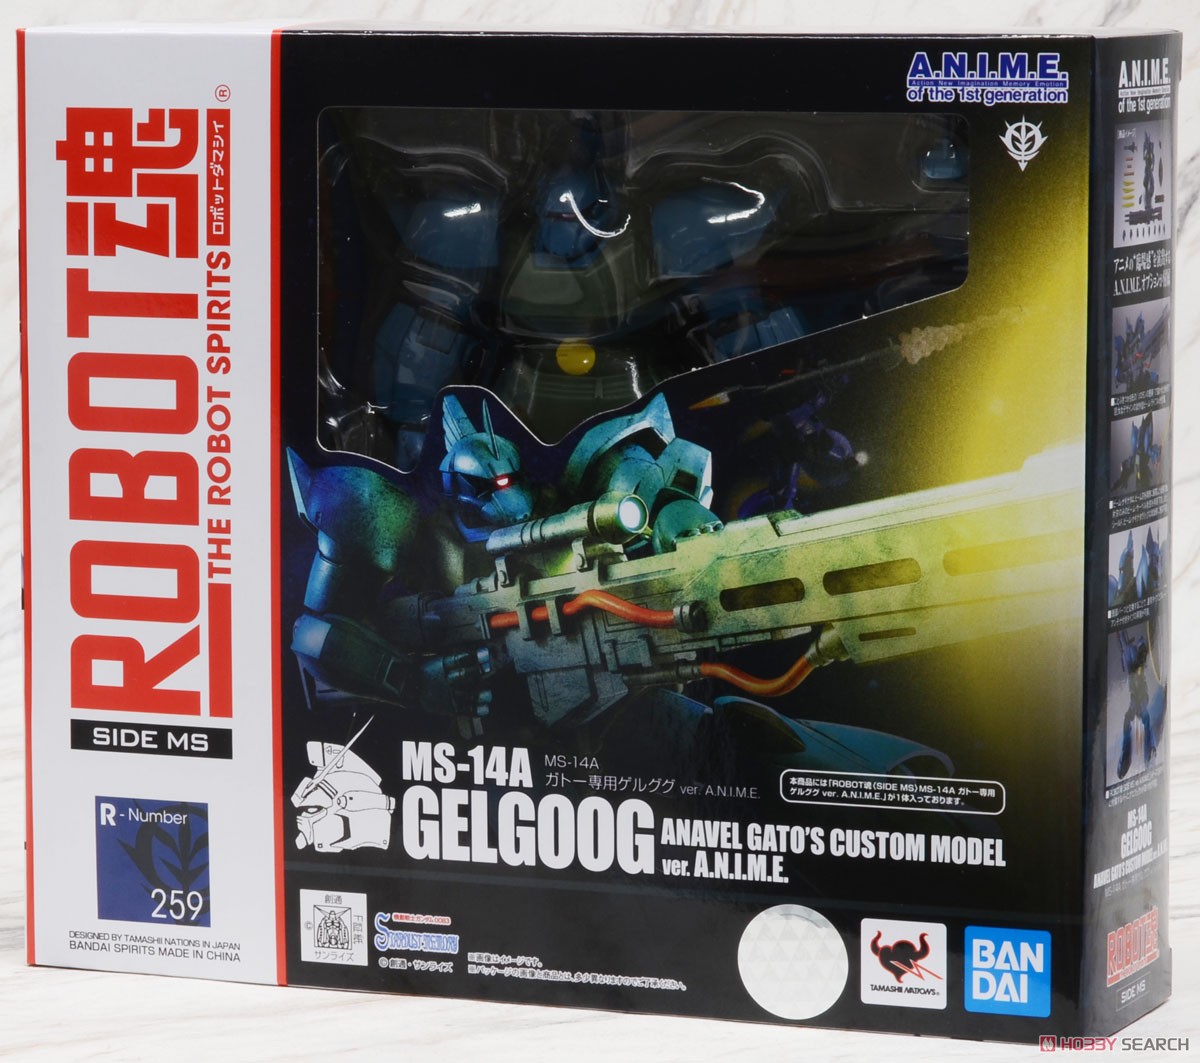 ROBOT魂 ＜ SIDE MS ＞ MS-14A ガトー専用ゲルググ ver. A.N.I.M.E. (完成品) パッケージ1